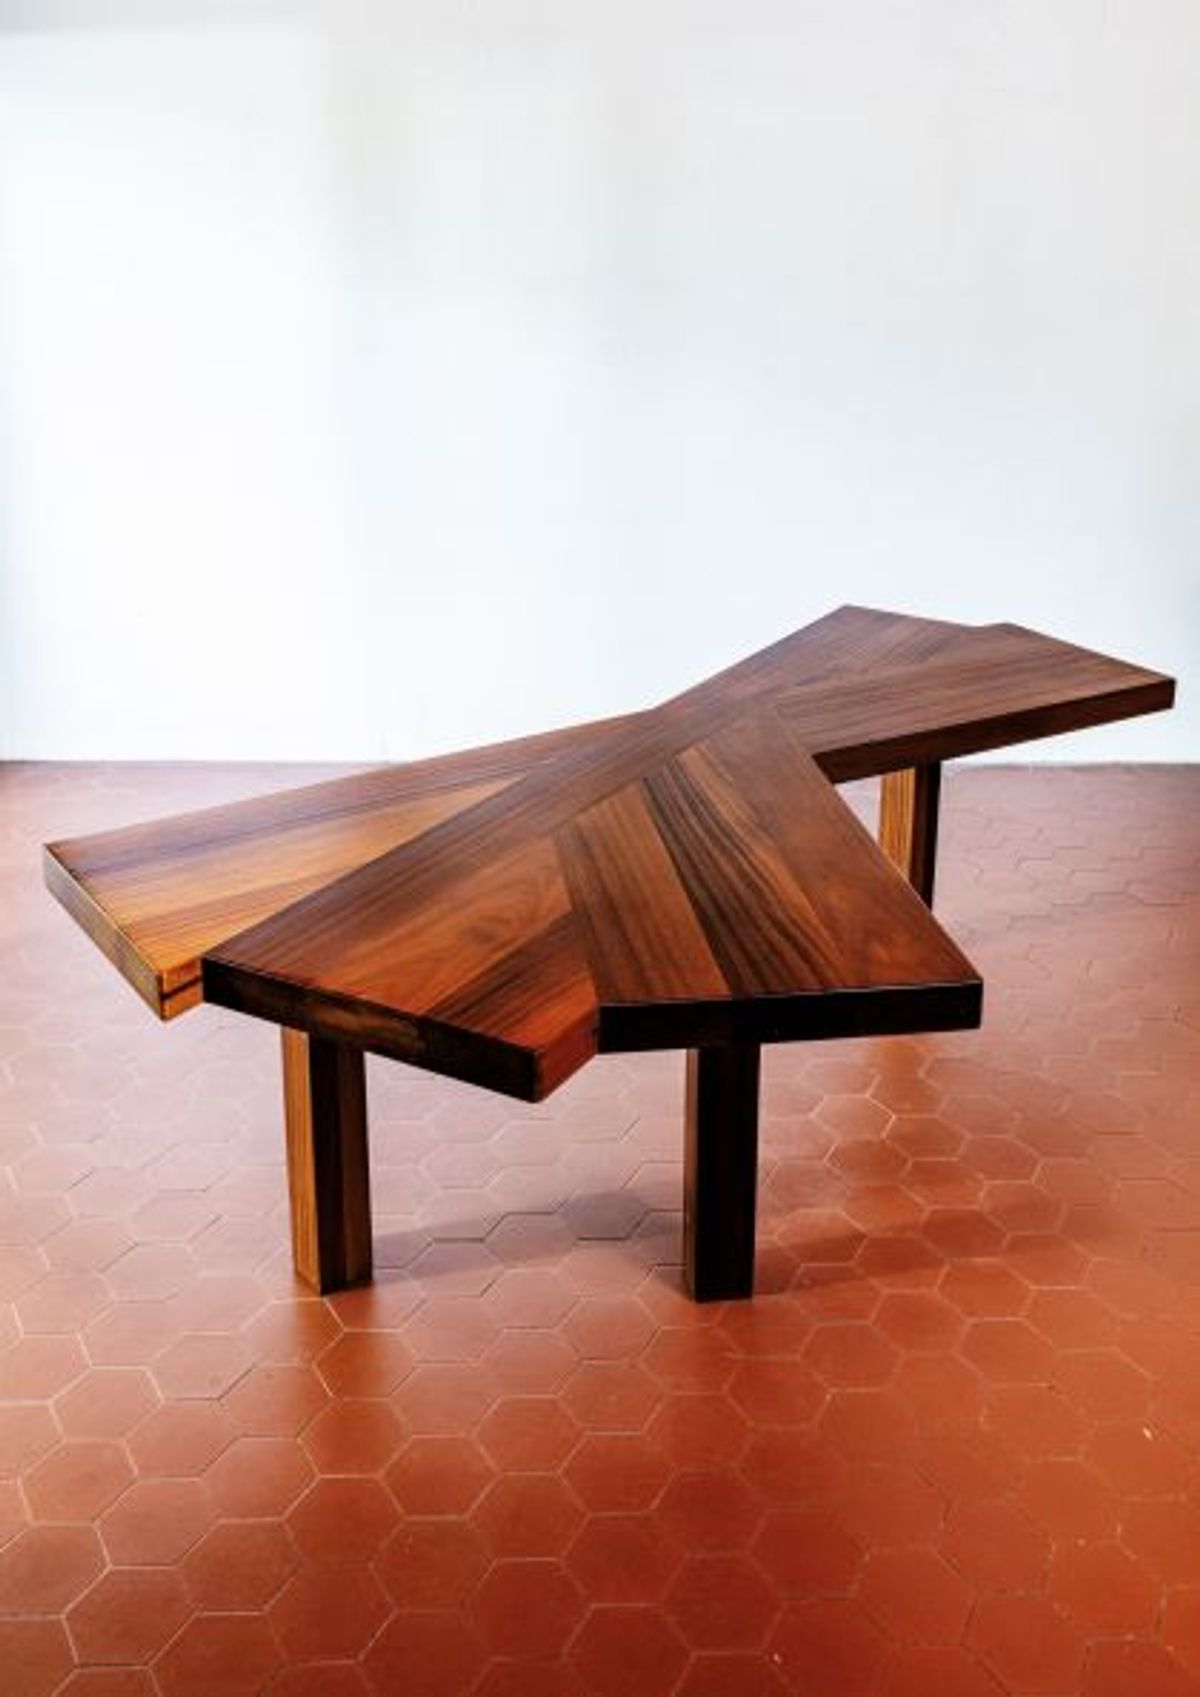 Charlotte Perriand, table Éventail, 1973. Courtesy Sotheby’s, D.R.